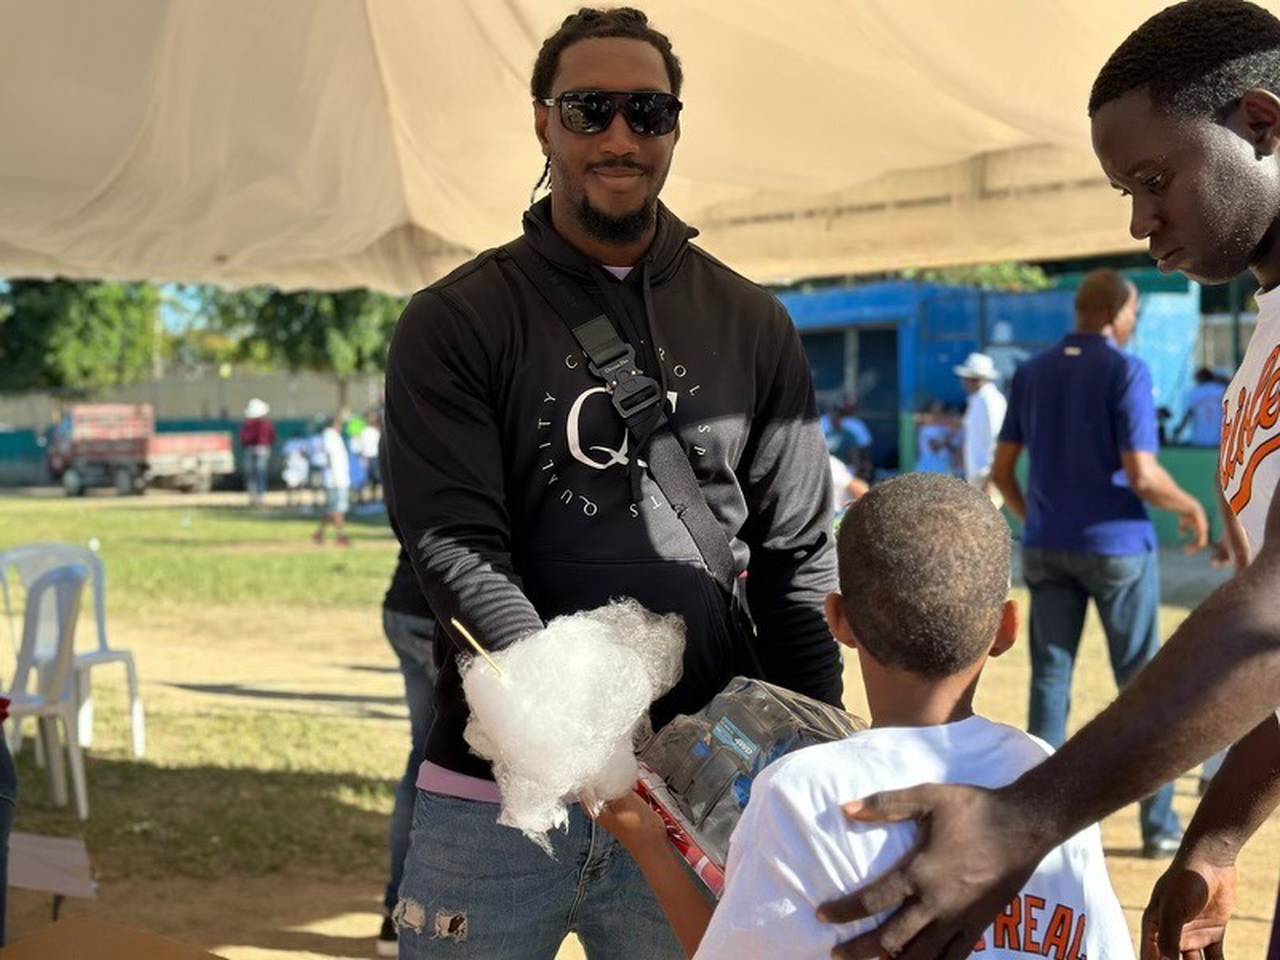 Orioles utilityman Jorge Mateo gives a toy to a child in San Luis, Dominican Republic. Each winter, Mateo hosts a donation drive for his home town. (Photo courtesy Alex Cotto)